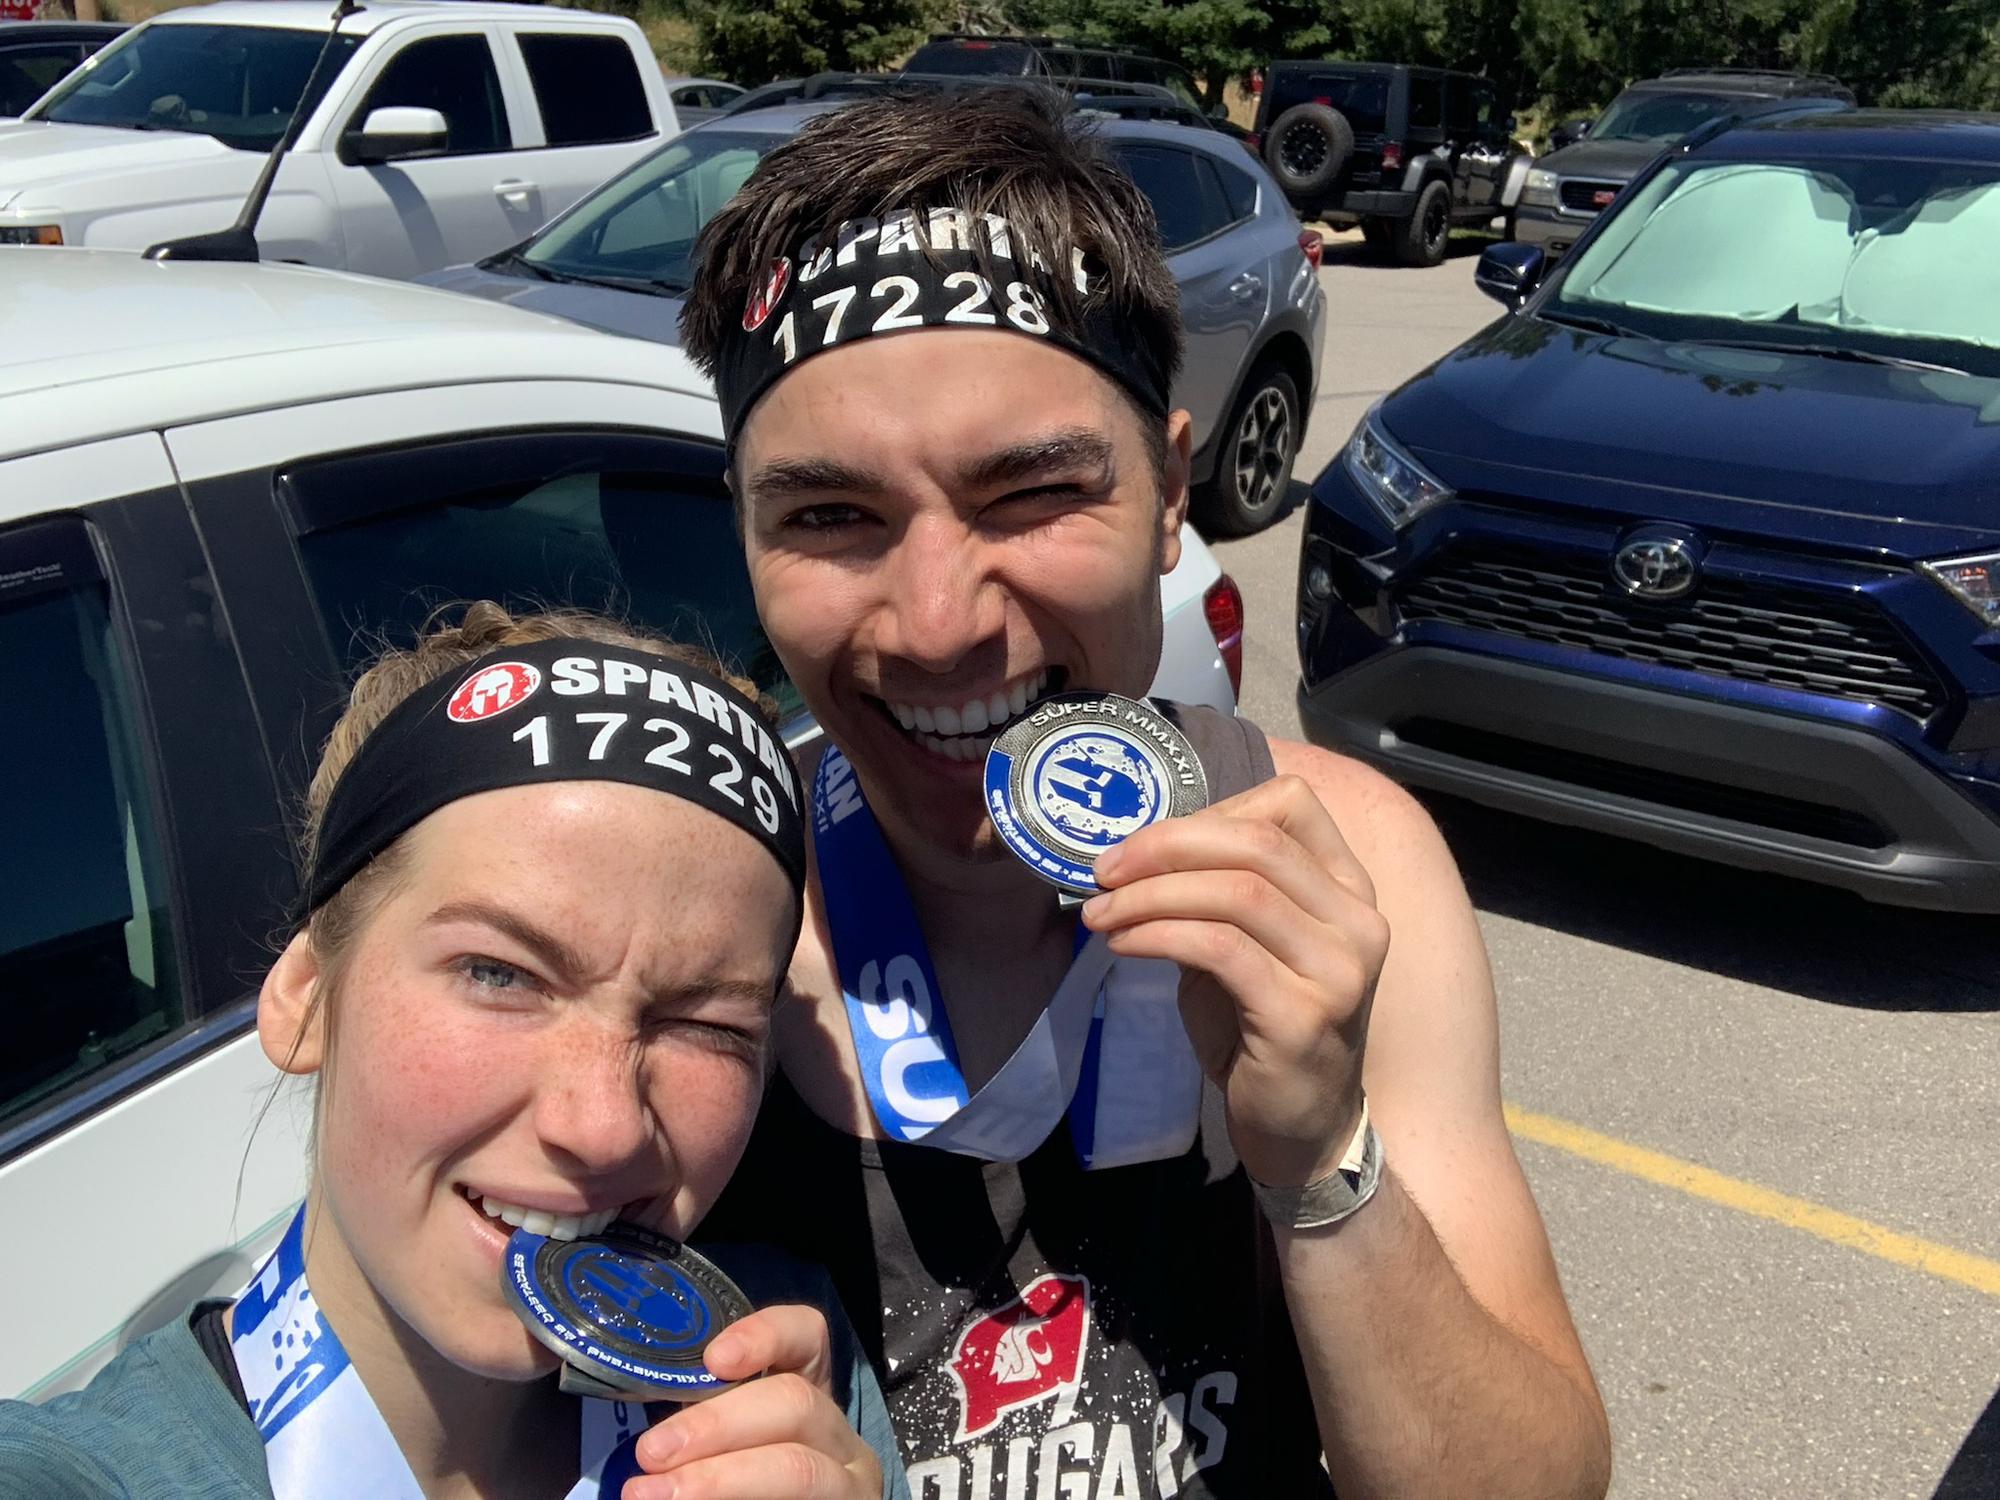 Spartan race: where our team work was put to the test